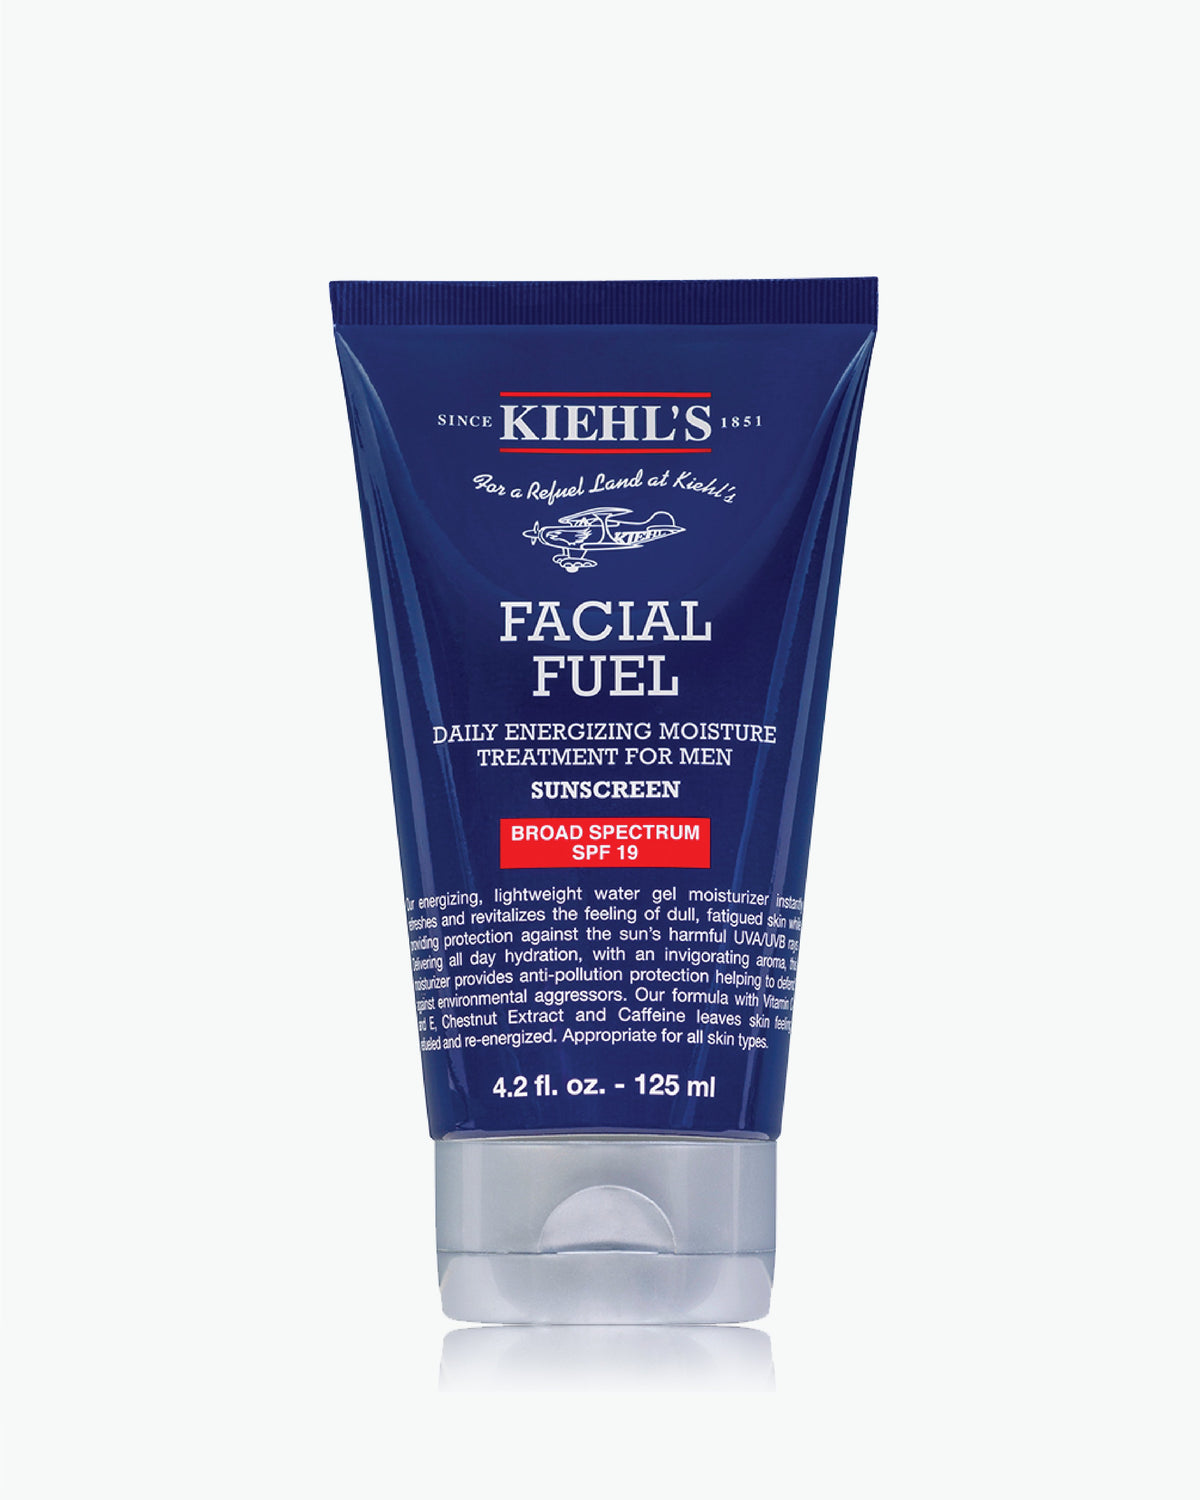 Facial Fuel Daily Energizing Moisture Treatment For Men SPF 19/20